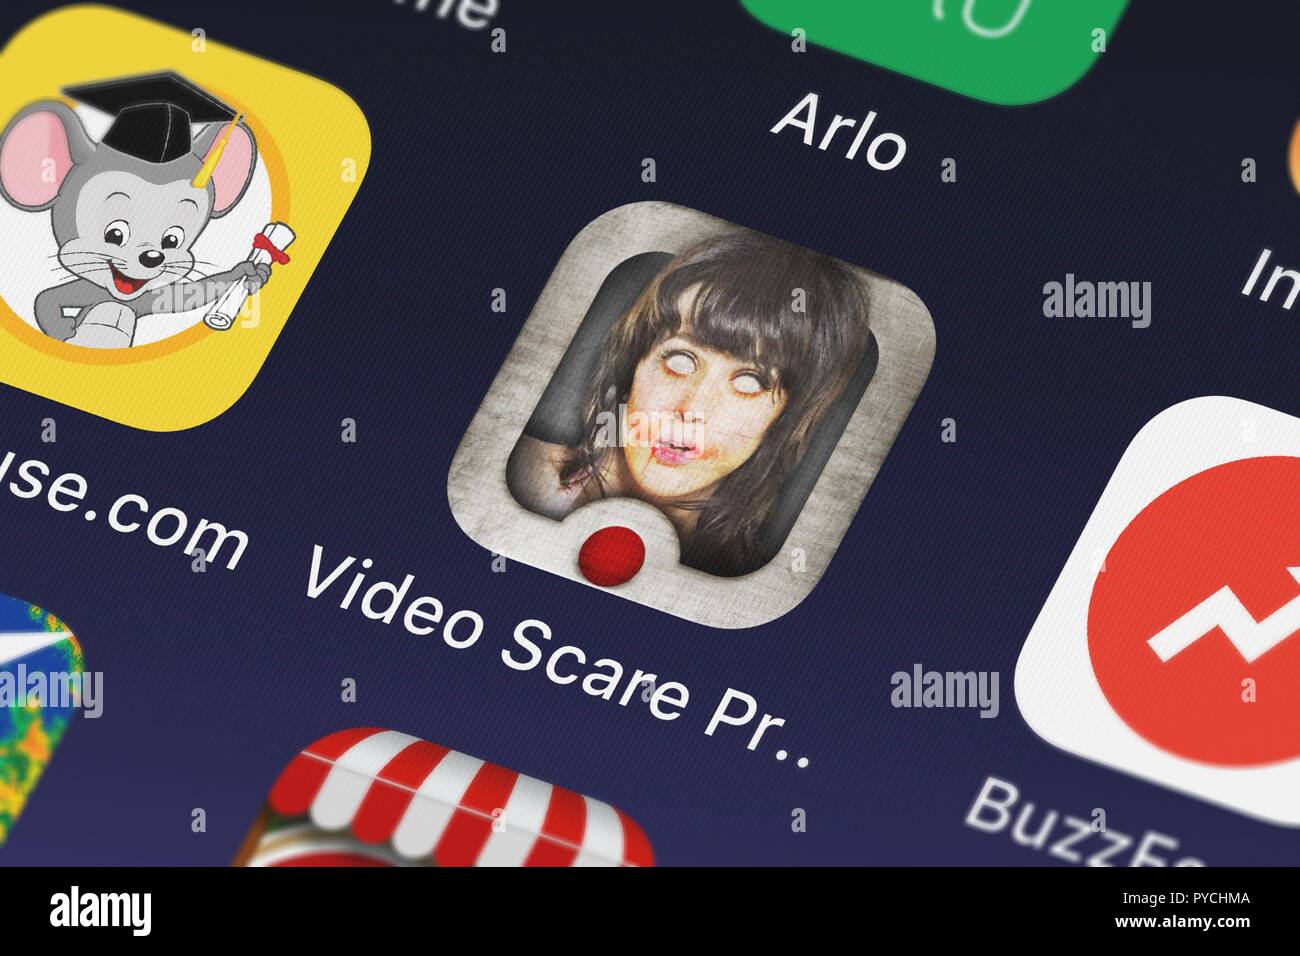 London, United Kingdom - October 26, 2018: Screenshot of the mobile app Video Scare Prank – Katy Perry Edition from VZO entertainment. Stock Photo